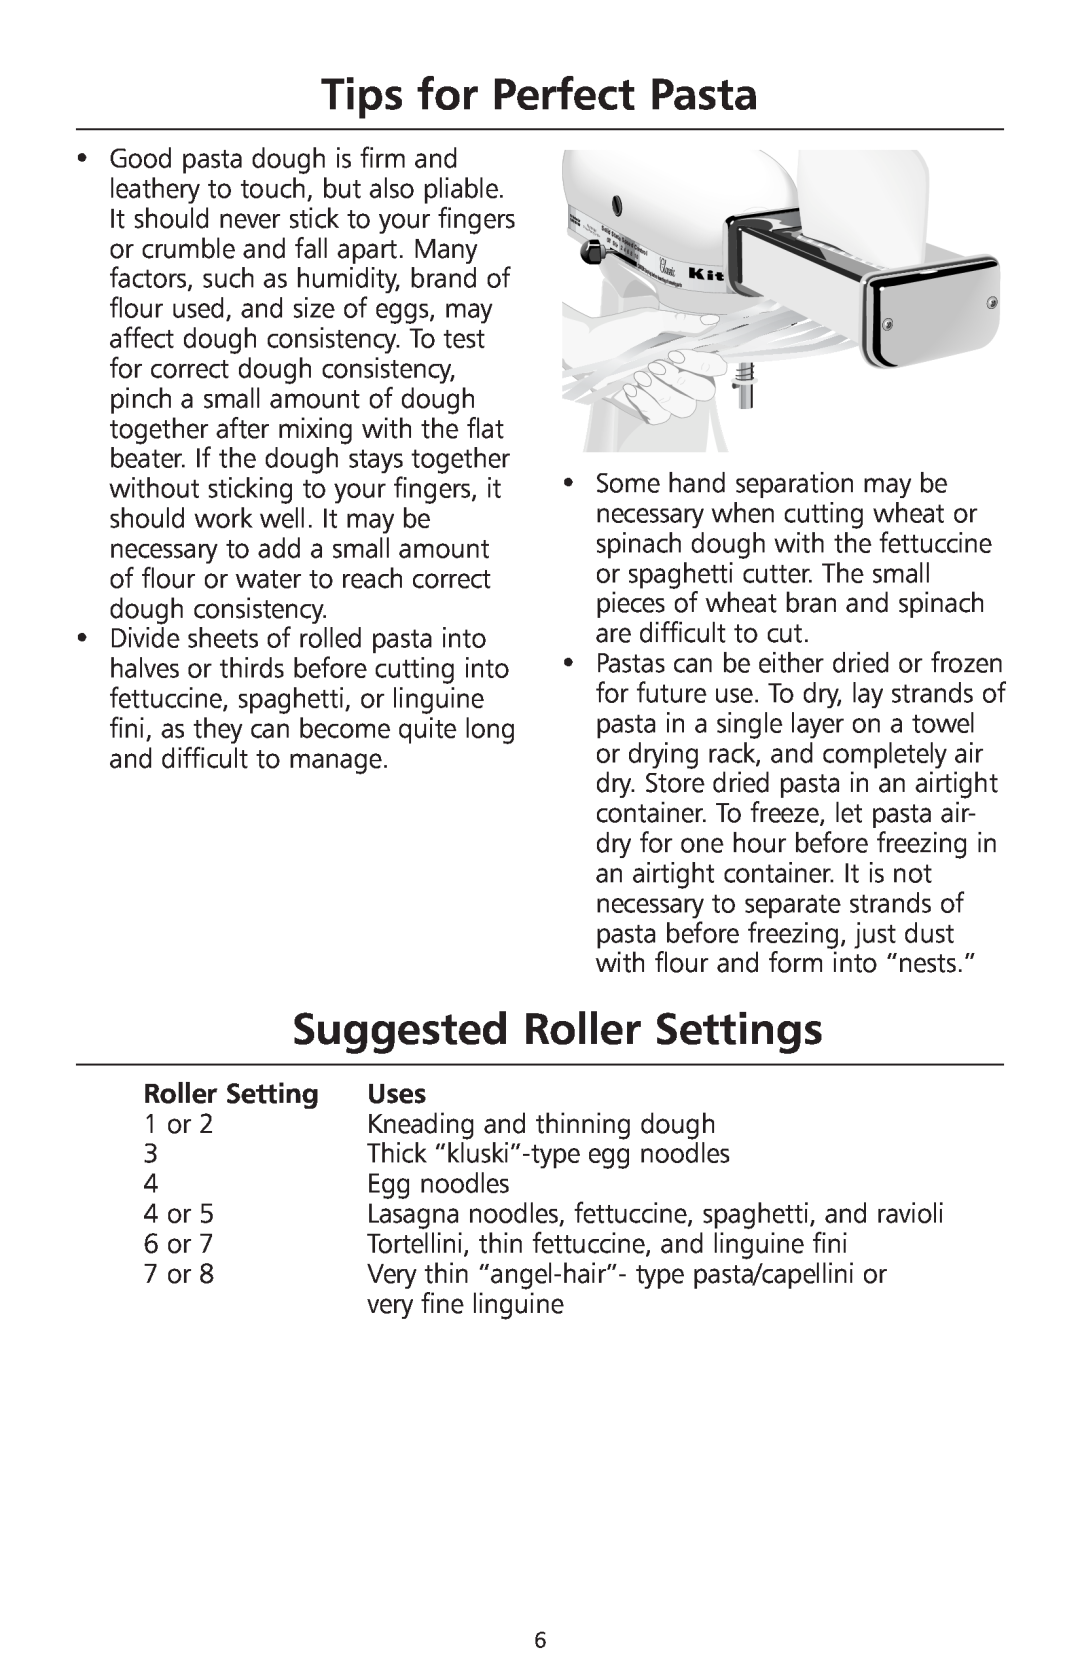 KitchenAid KPRA manual Tips for Perfect Pasta, Suggested Roller Settings, Uses 